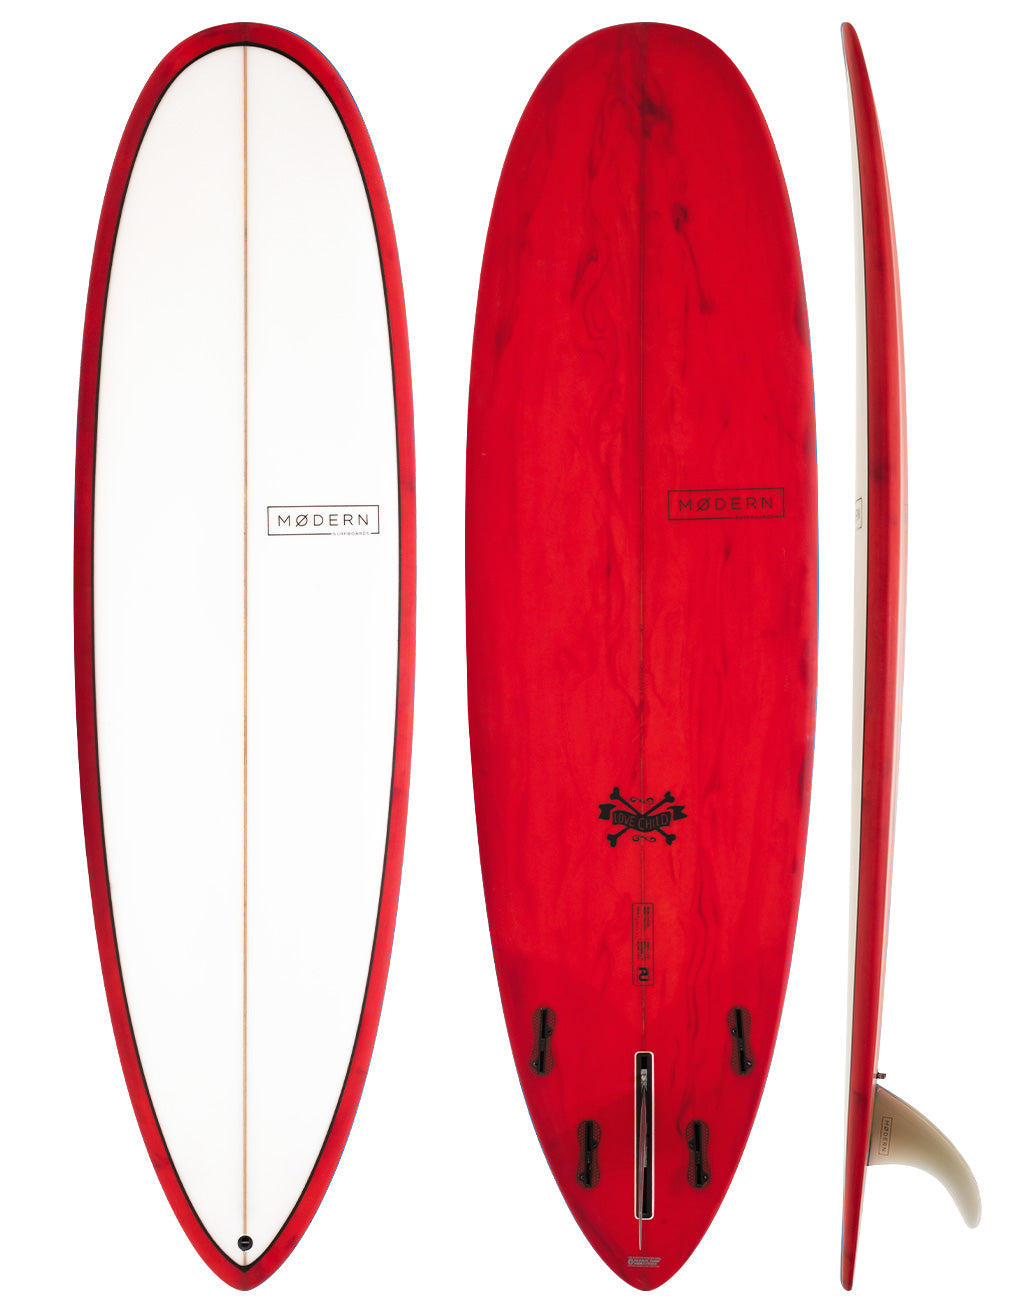 Modern Surfboards - Love Child - red and white mid length surfboard